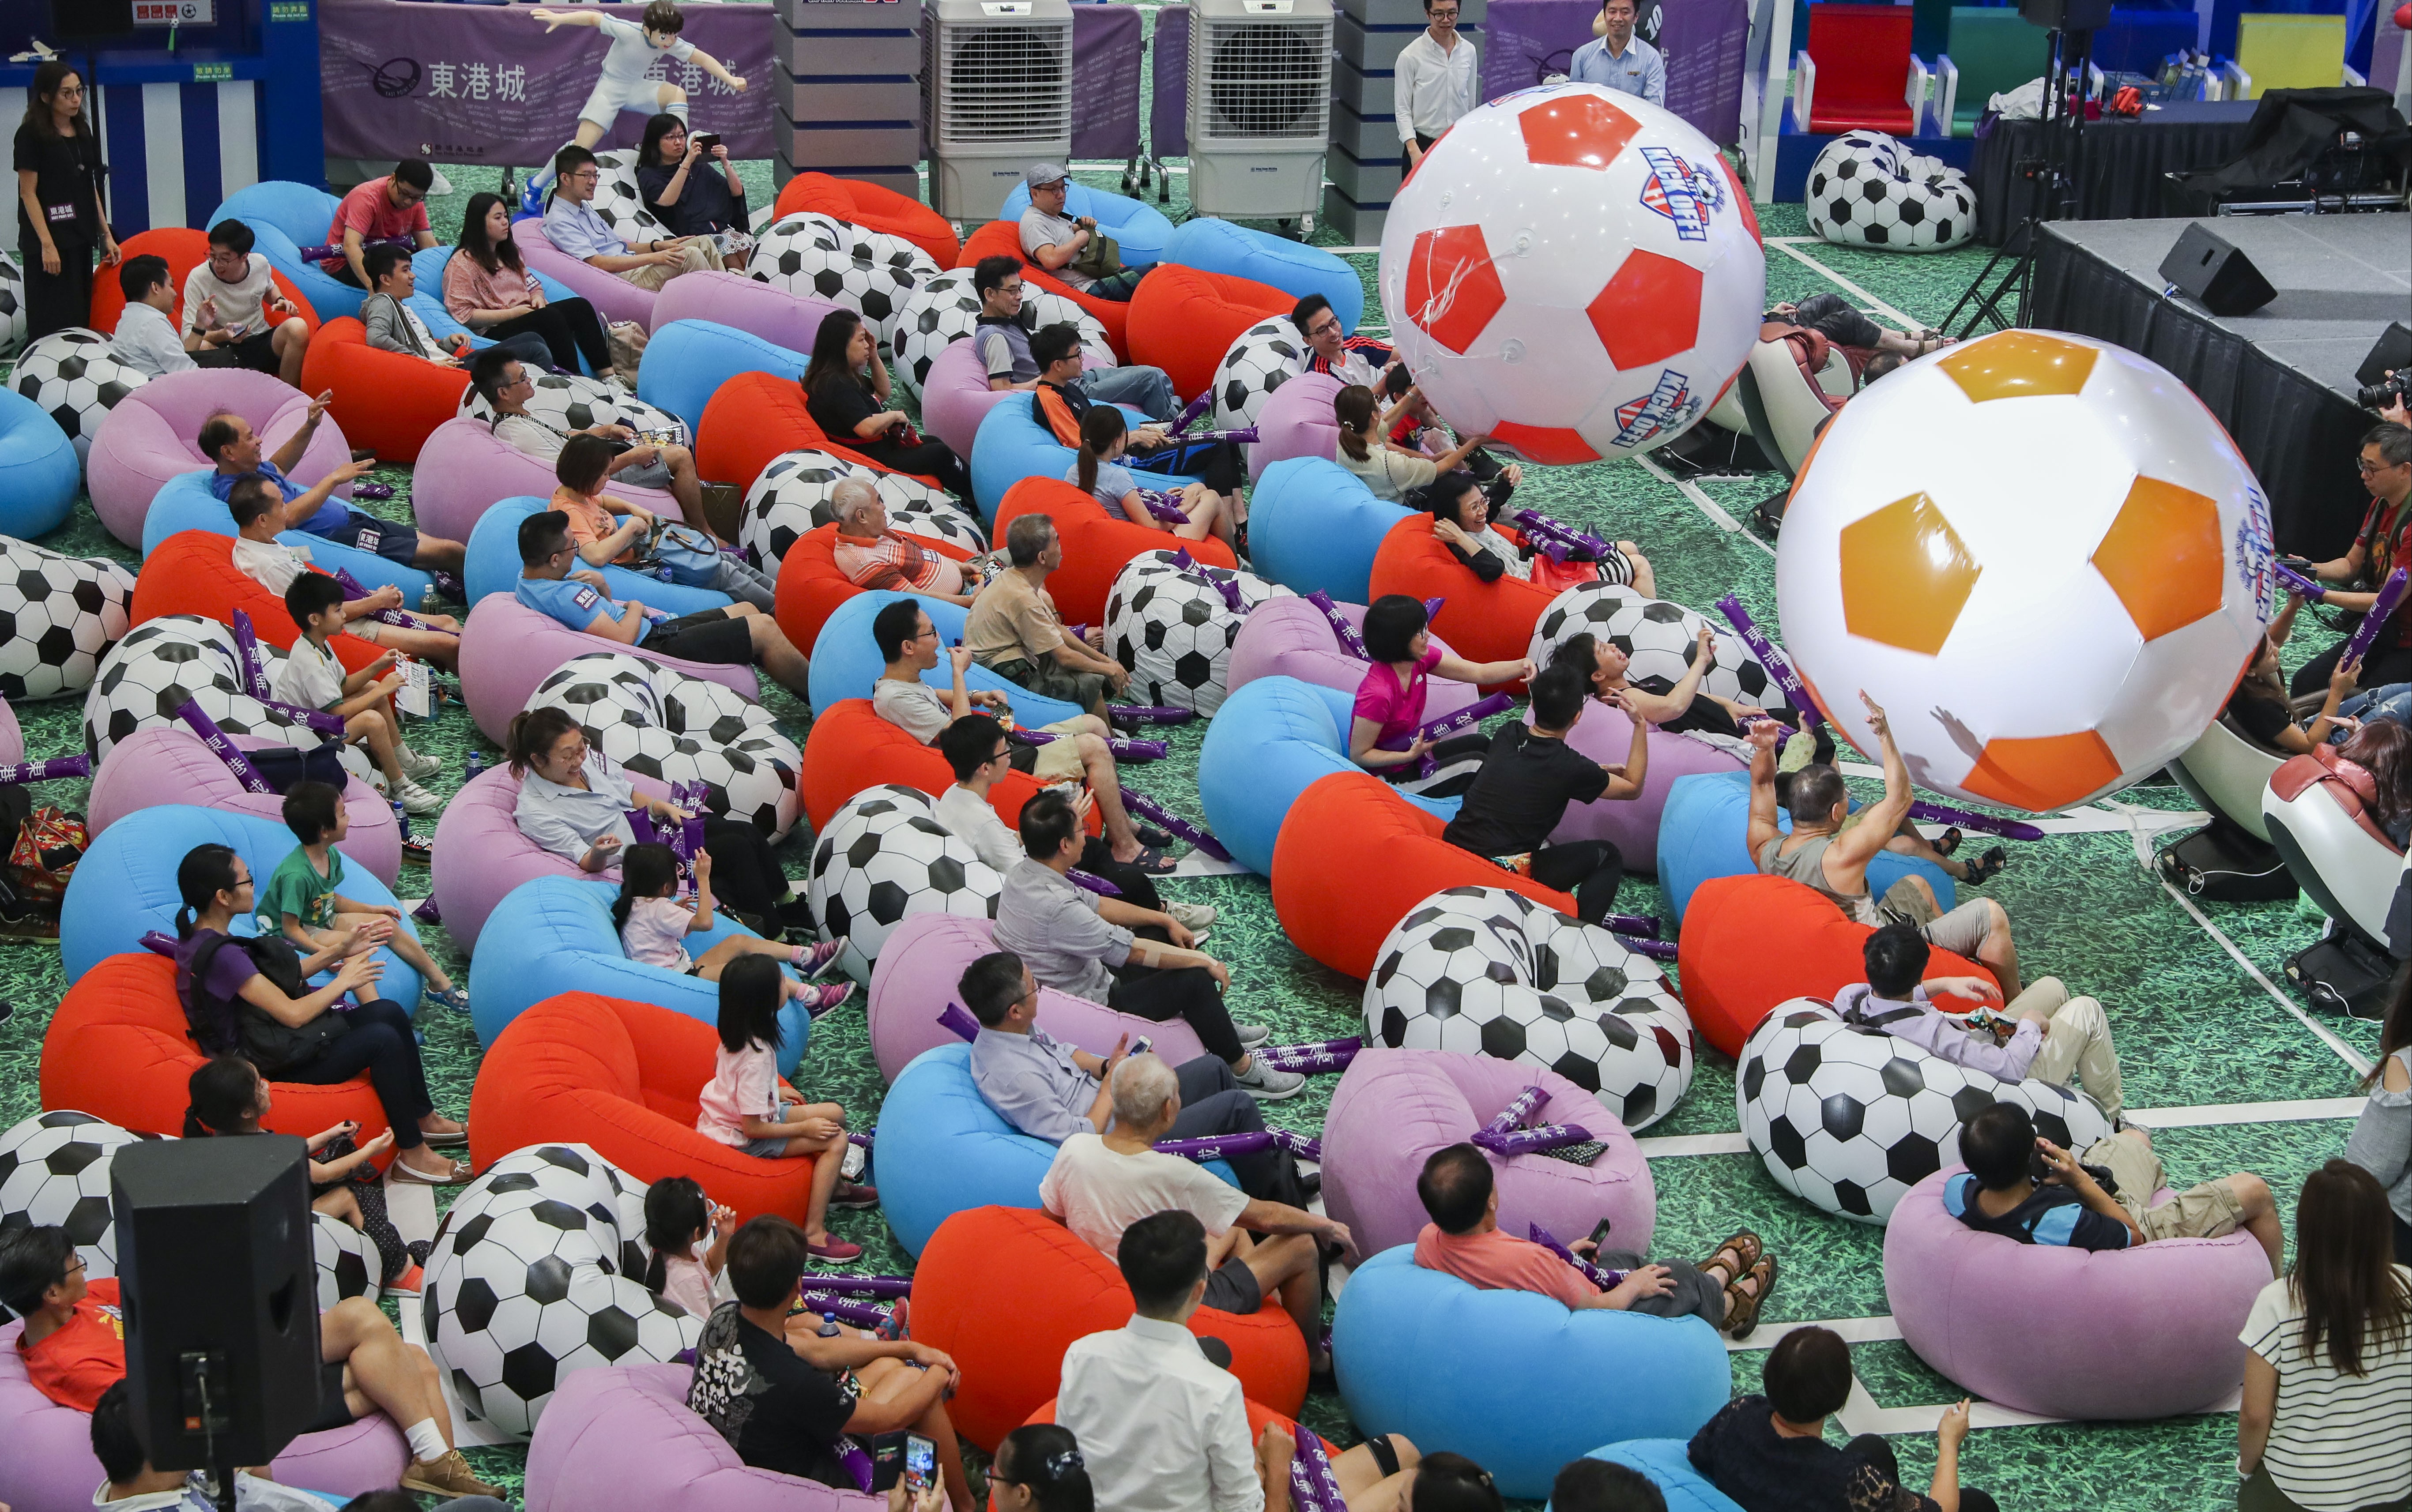 Hong Kong soccer fans follow hot ticket events like the World Cup, like this match broadcast at a Tseung Kwan O mall on June 14, but may be less familiar with local soccer players. Photo: K.Y. Cheng